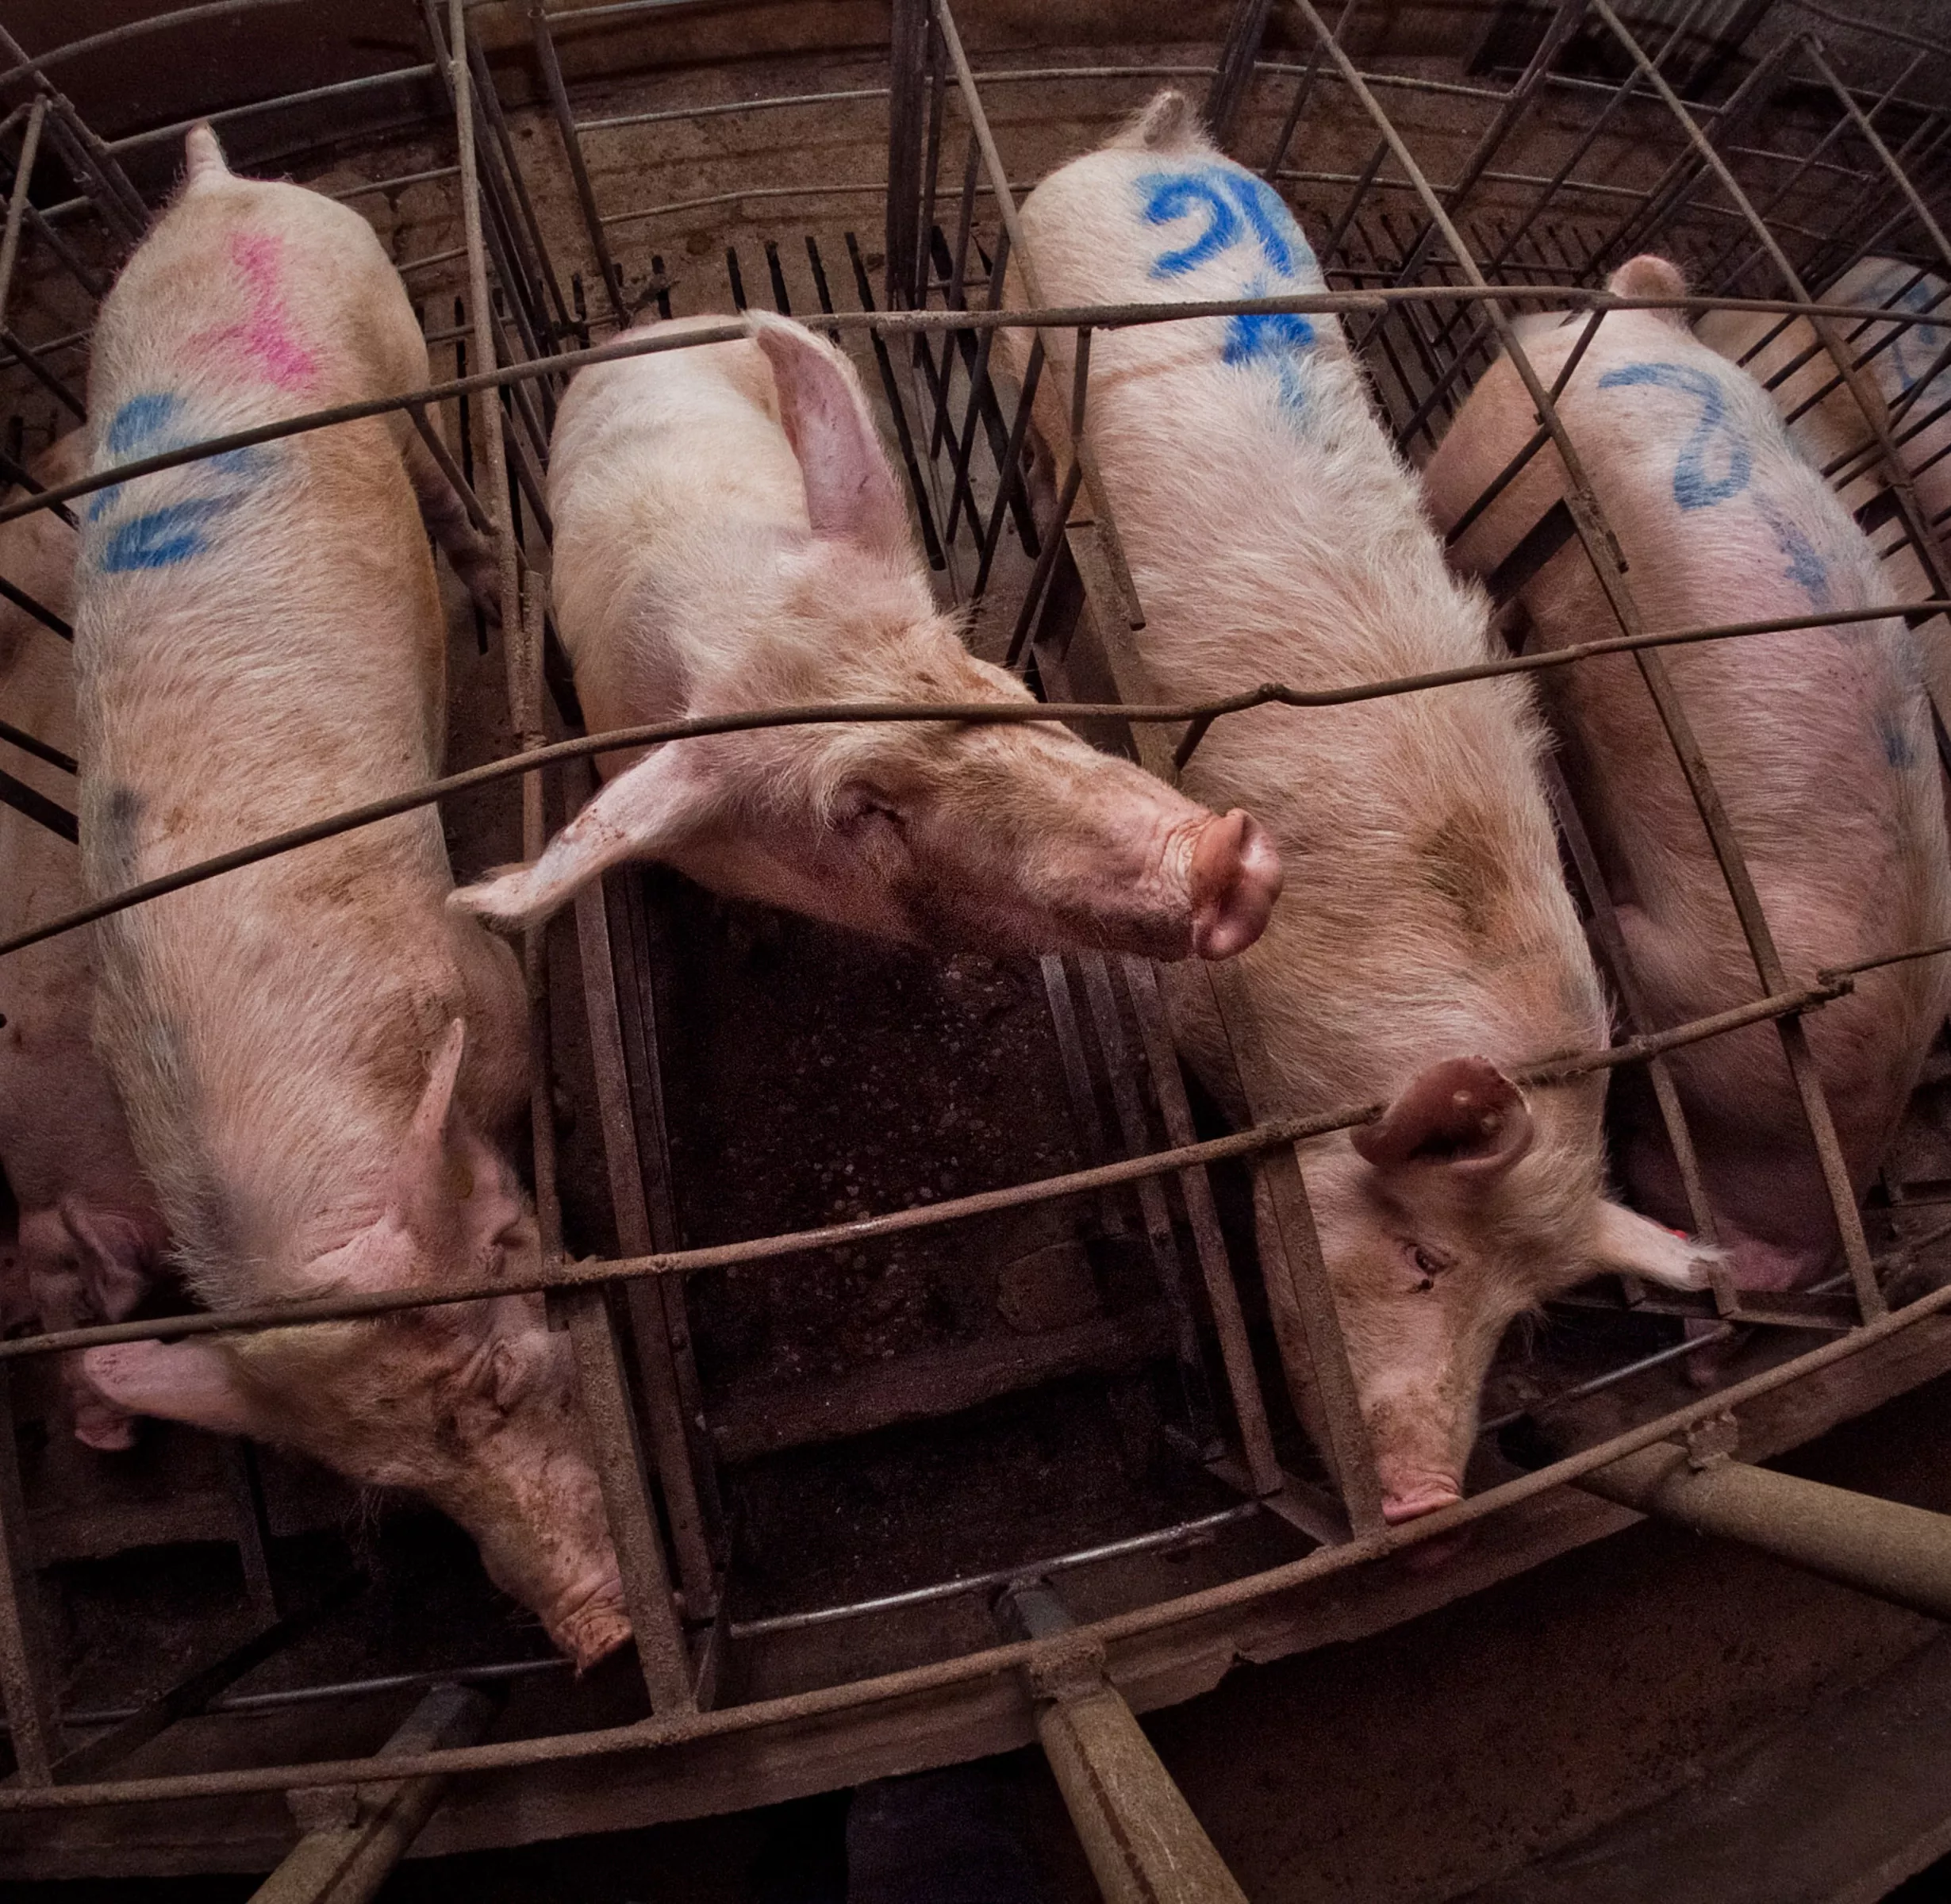 Pigs confined in gestation cages